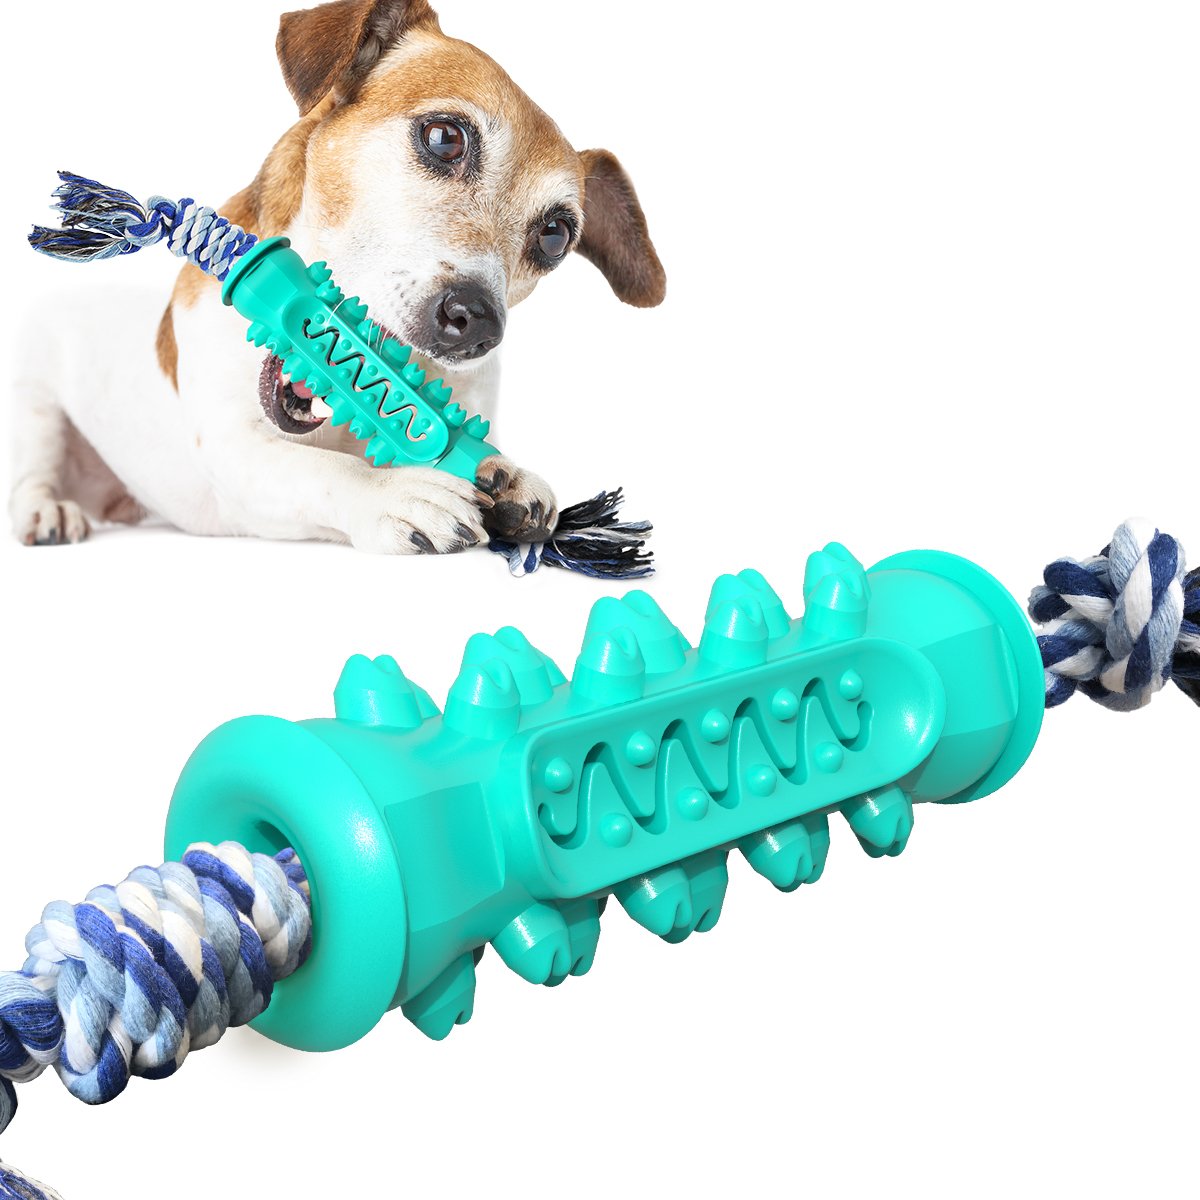 Dog chew toy with snack hiding place, interactive chew toy, puppy dental care for dogs, non-toxic, 2 pack